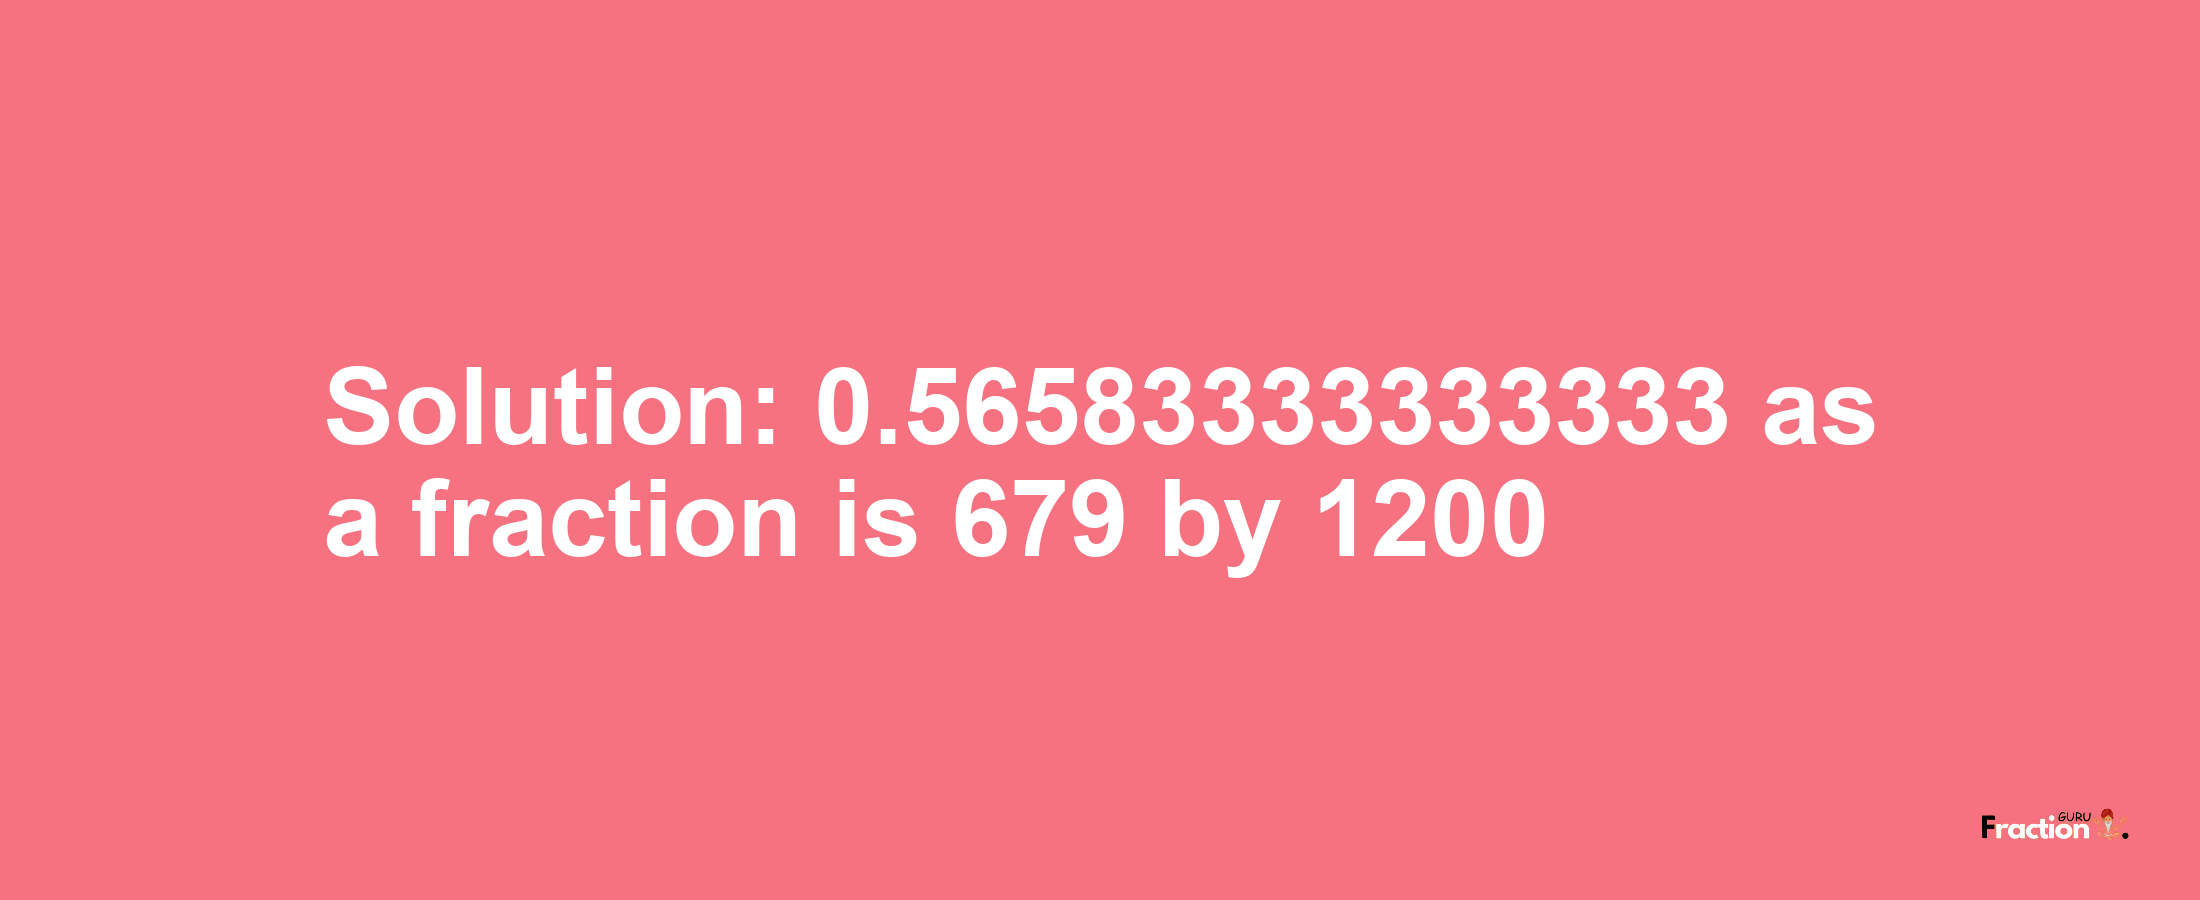 Solution:0.56583333333333 as a fraction is 679/1200